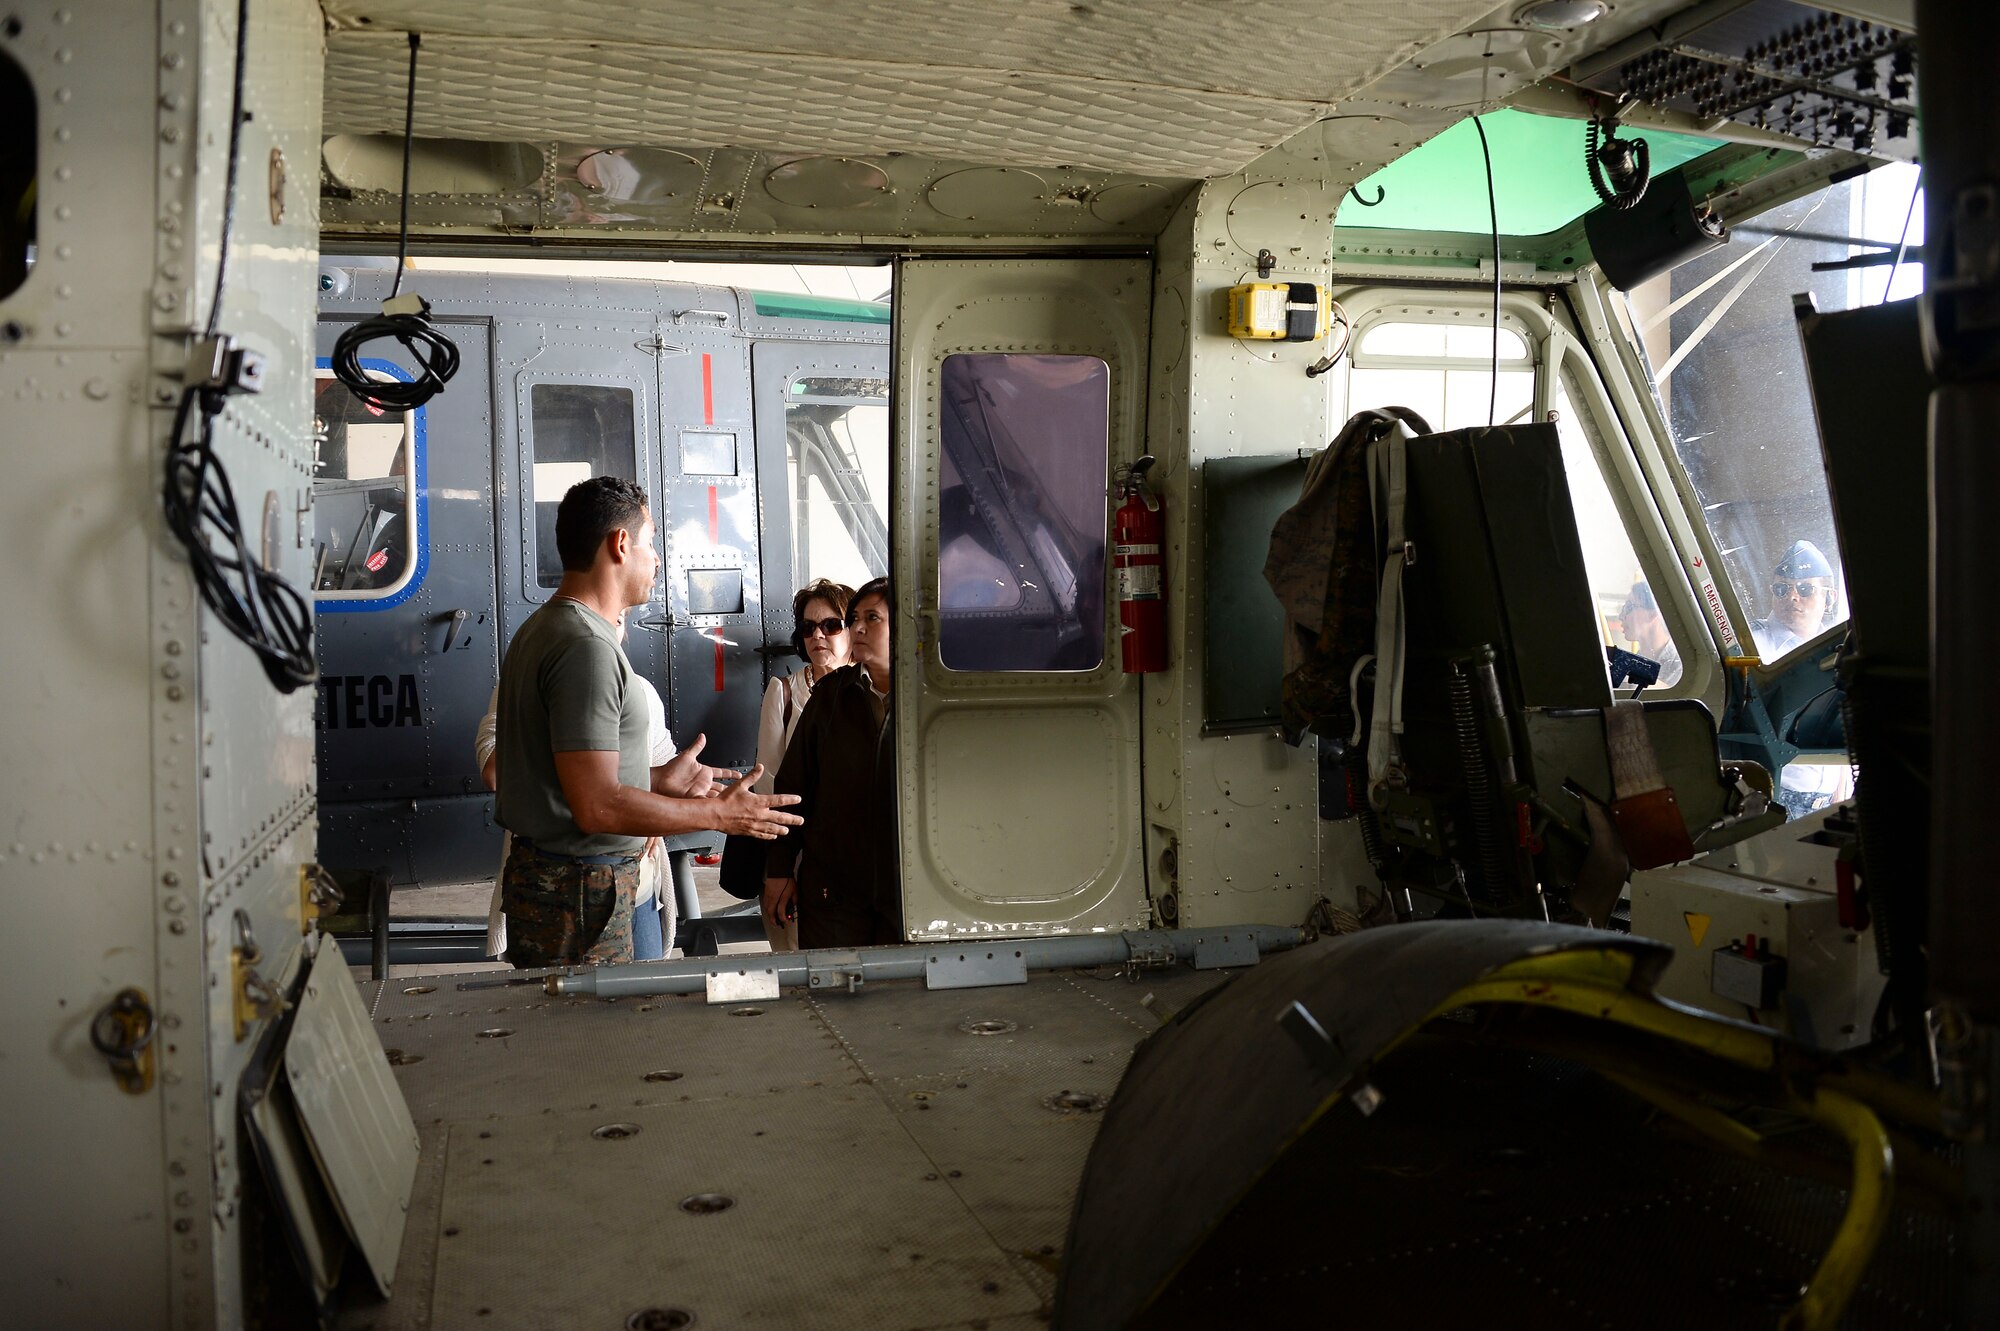 A maintenance technician with the Guatemalan air force briefs members of 12th Air Force (Air Forces Southern) and the Arkansas Air National Guard on the Bell UH-1, which is used for air evacuation, during a subject matter expert exchange with the Guatemalan Military in Guatemala City, Guatemala, Aug. 6, 2014.  The briefing informed the U.S. medical technicians of the Guatemalan air force’s aerospace medical capabilities. (U.S. Air Force photo by Tech. Sgt. Heather R. Redman/Released)